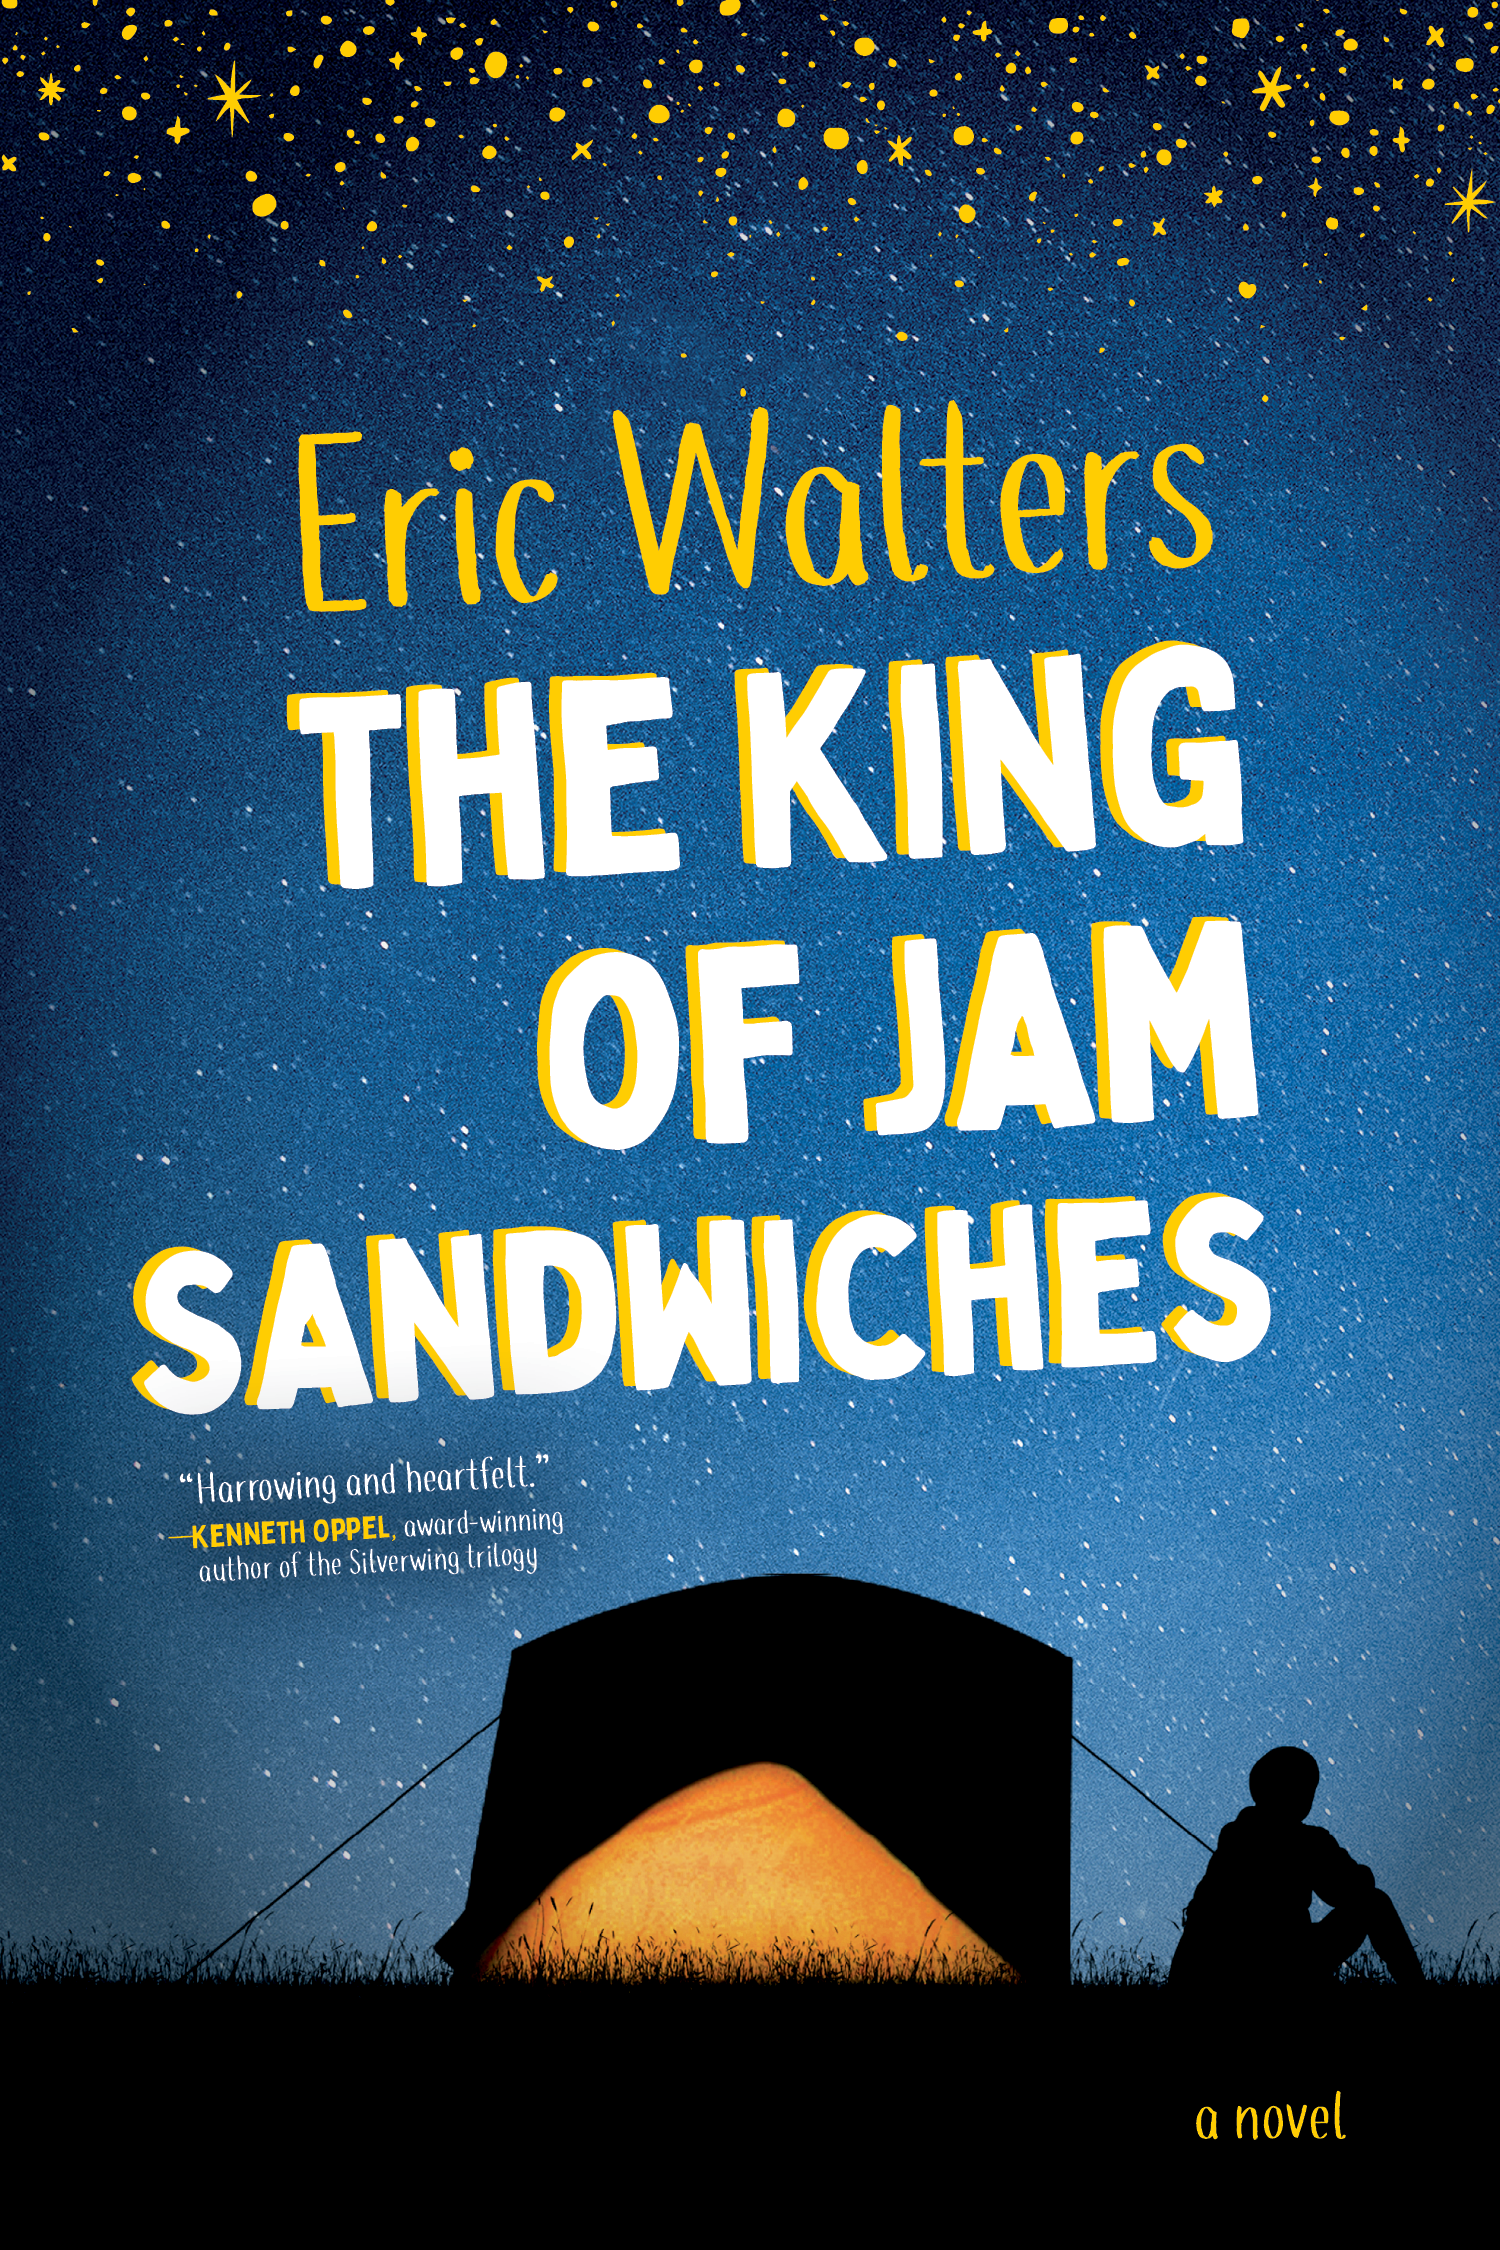 The King of Jam Sandwiches by Eric Walters book cover